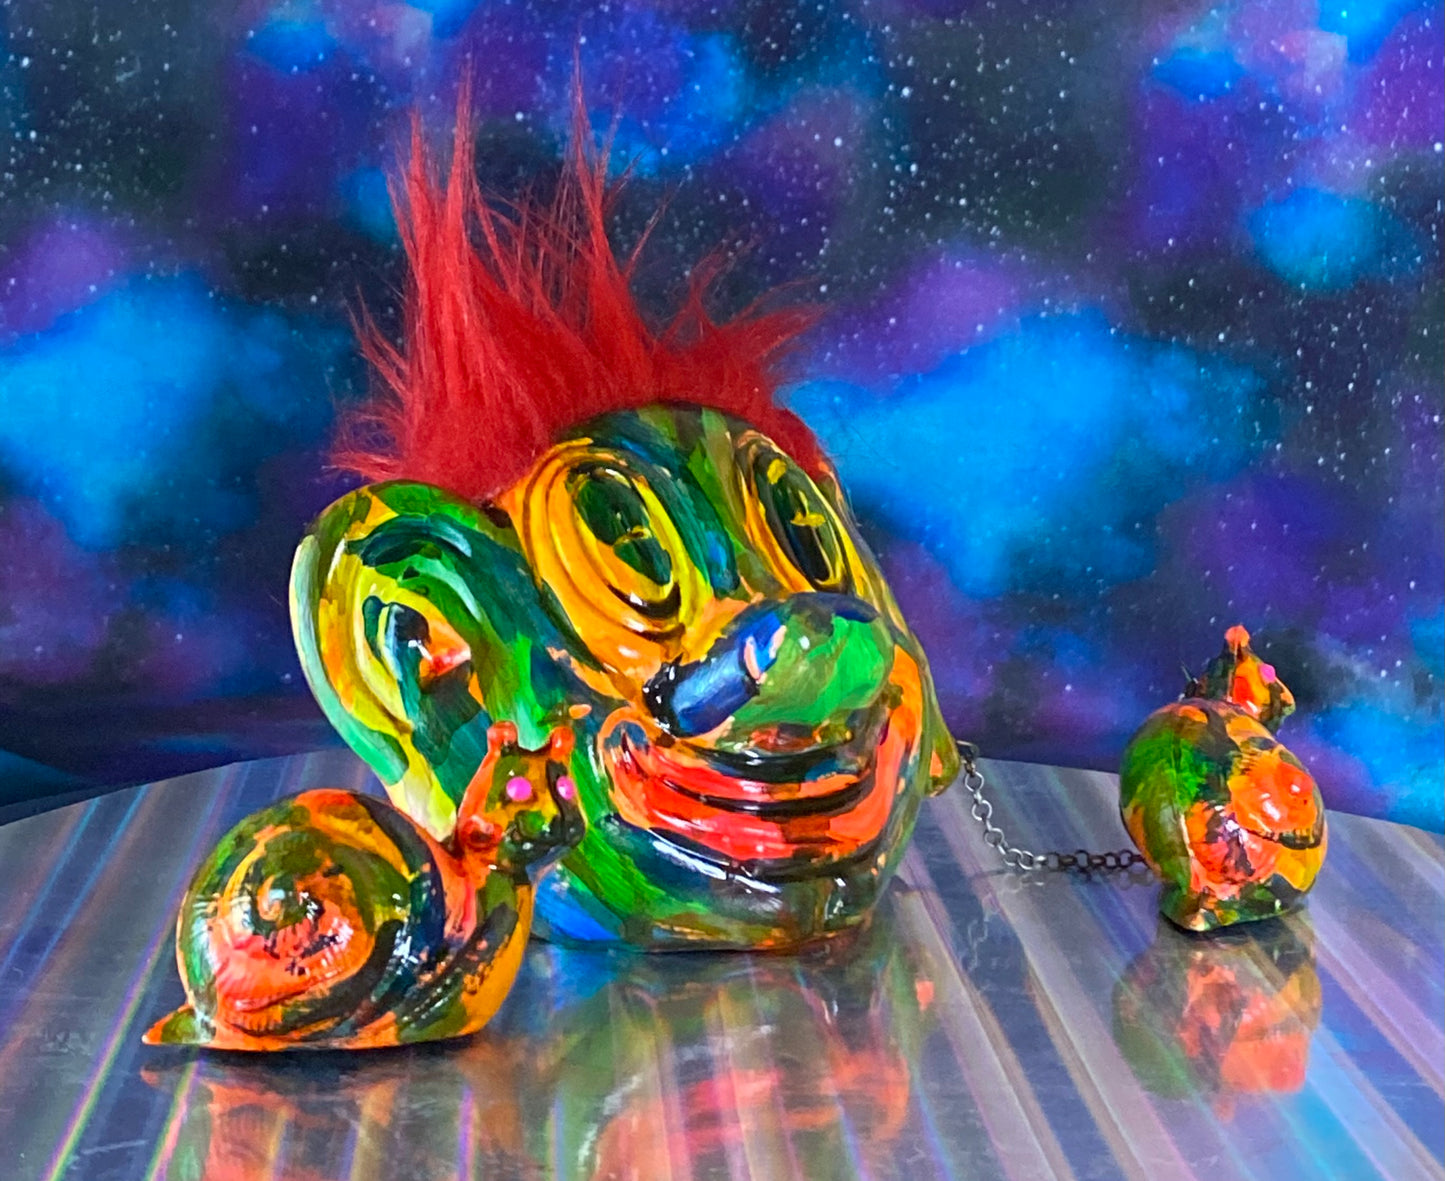 Red Hair Clown Chained to Two Snails